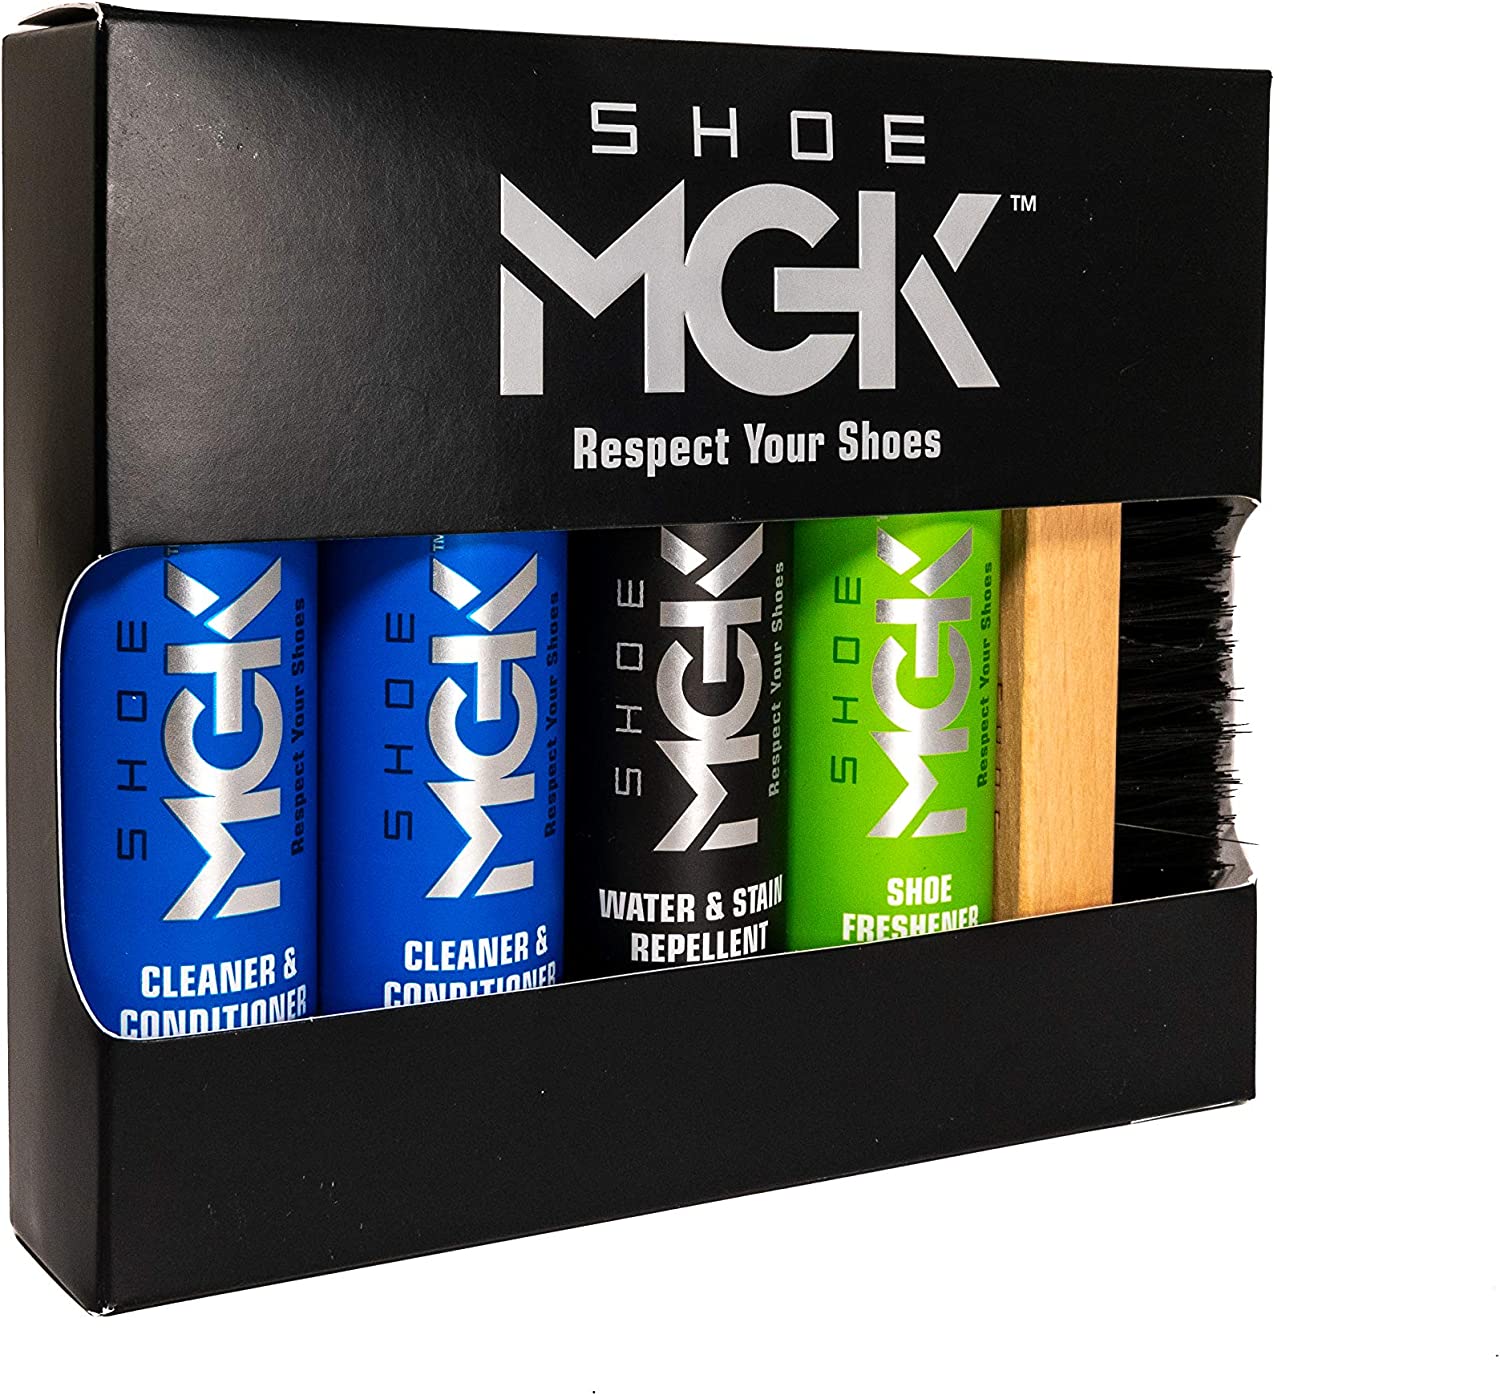 SHOE MGK Complete Kit - Shoe Care Kit to Clean, [...]